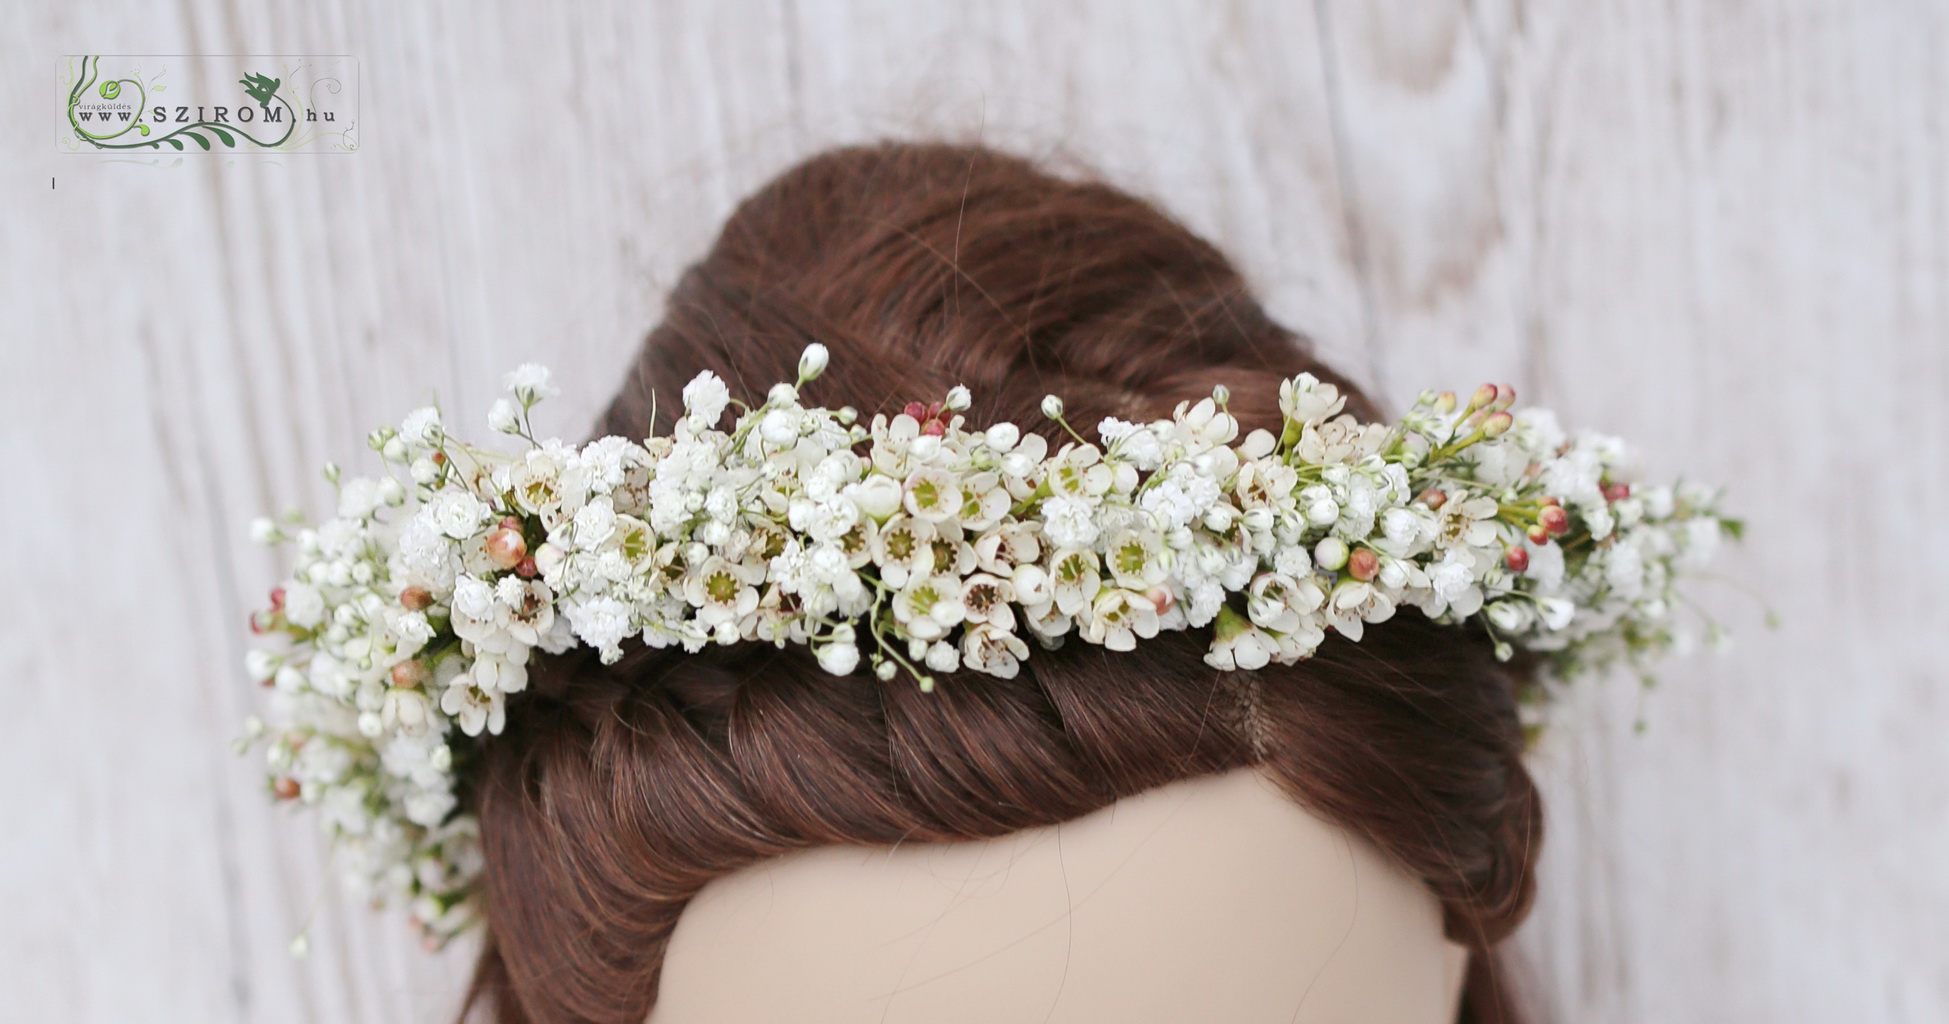 flower delivery Budapest - hair wreath made of white wax and baby's breathe